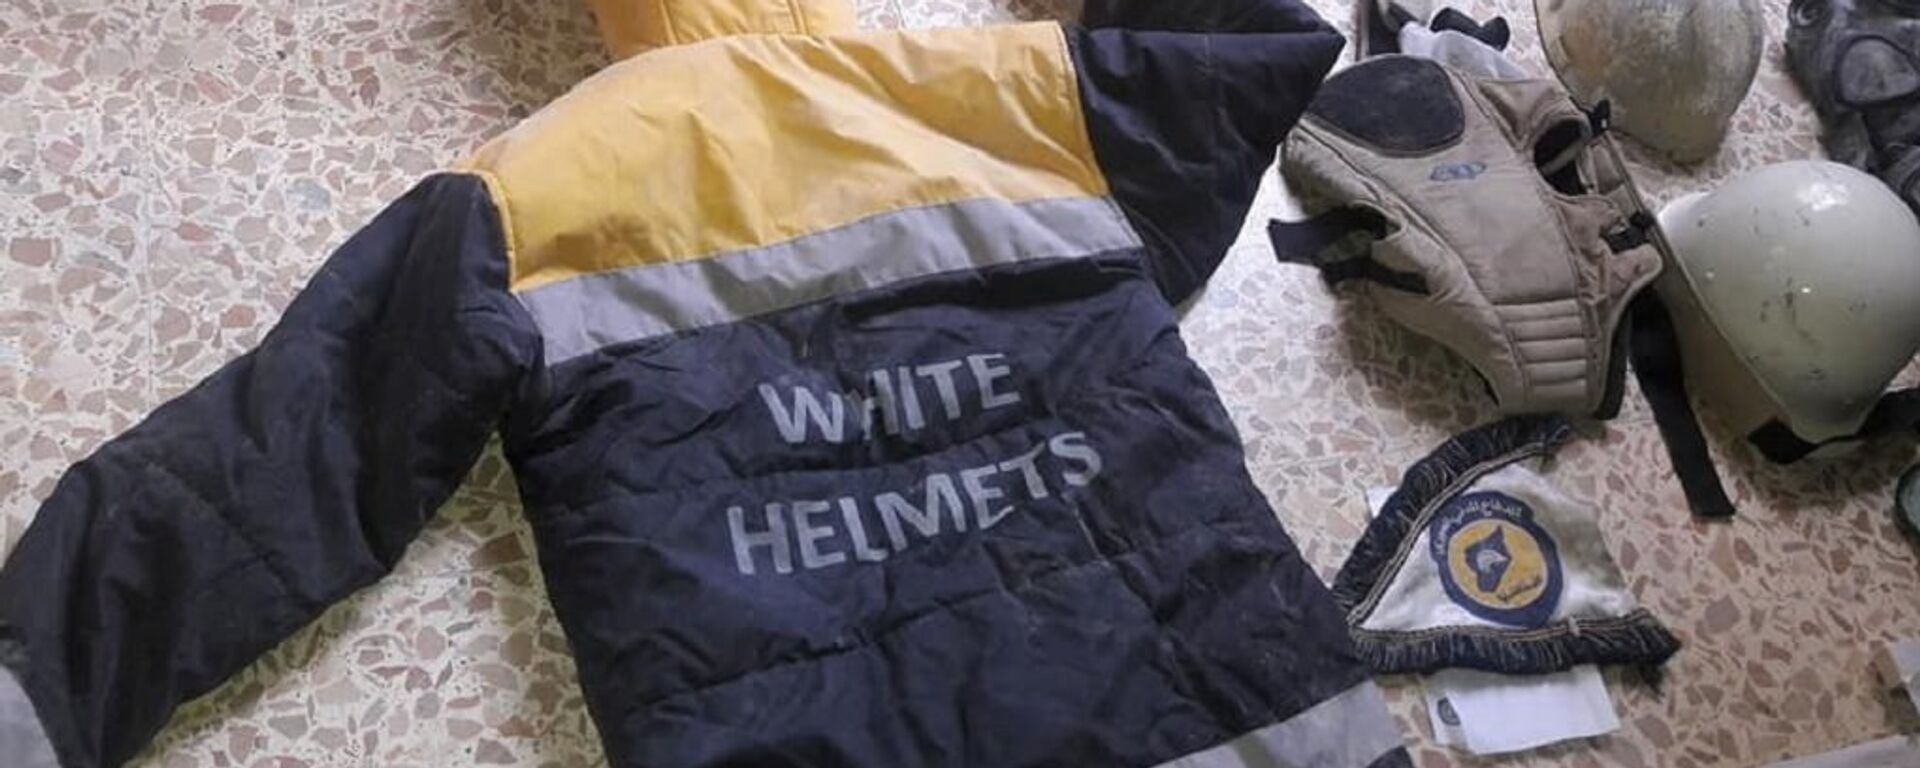 White Helmets uniform found during the search of terrorists’ headquarters in Eastern Ghouta. - Sputnik International, 1920, 15.02.2021